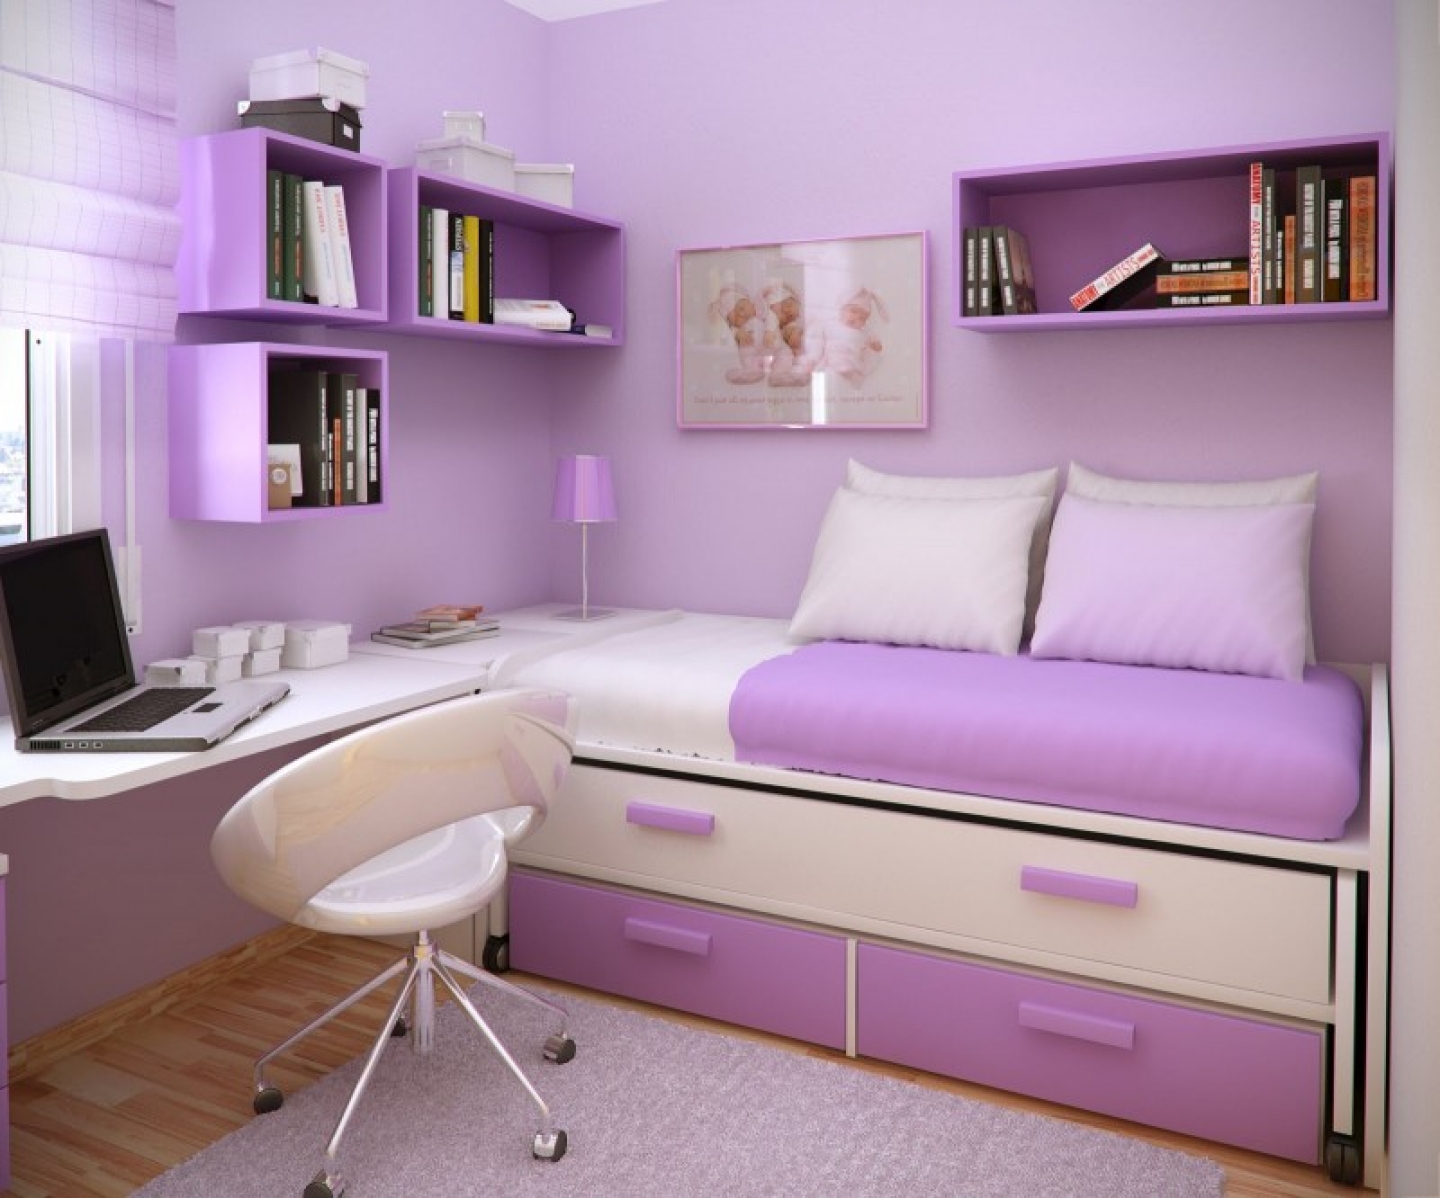 Free Download Ideas For Girls Bedrooms For Teenage Girls For